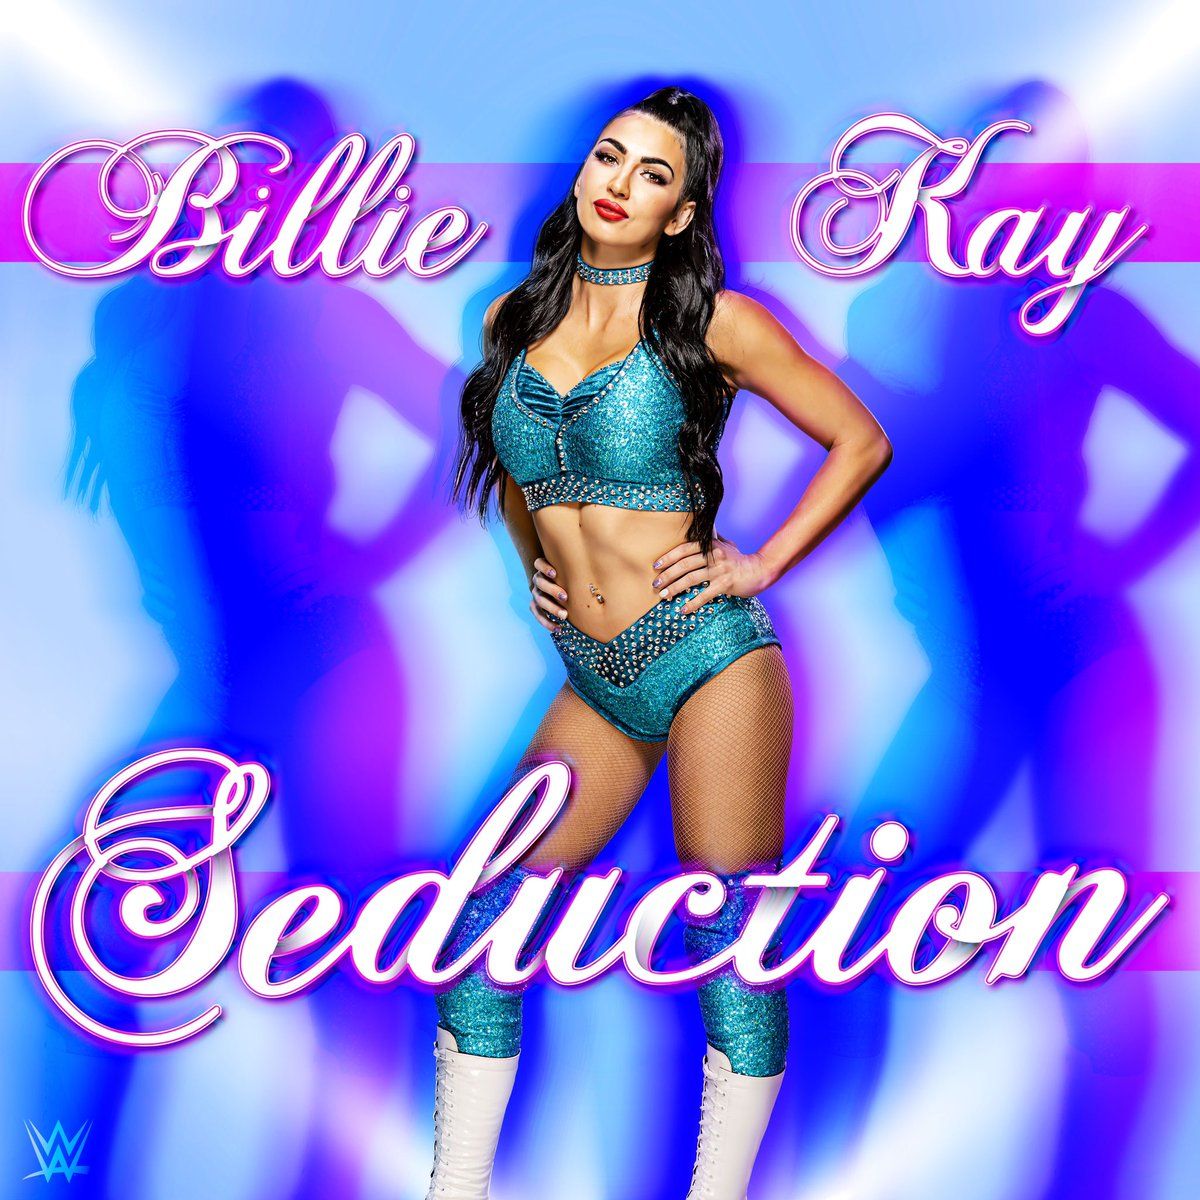 Billie Kay entrance theme “Seduction” is available now and #NewMusicFriday